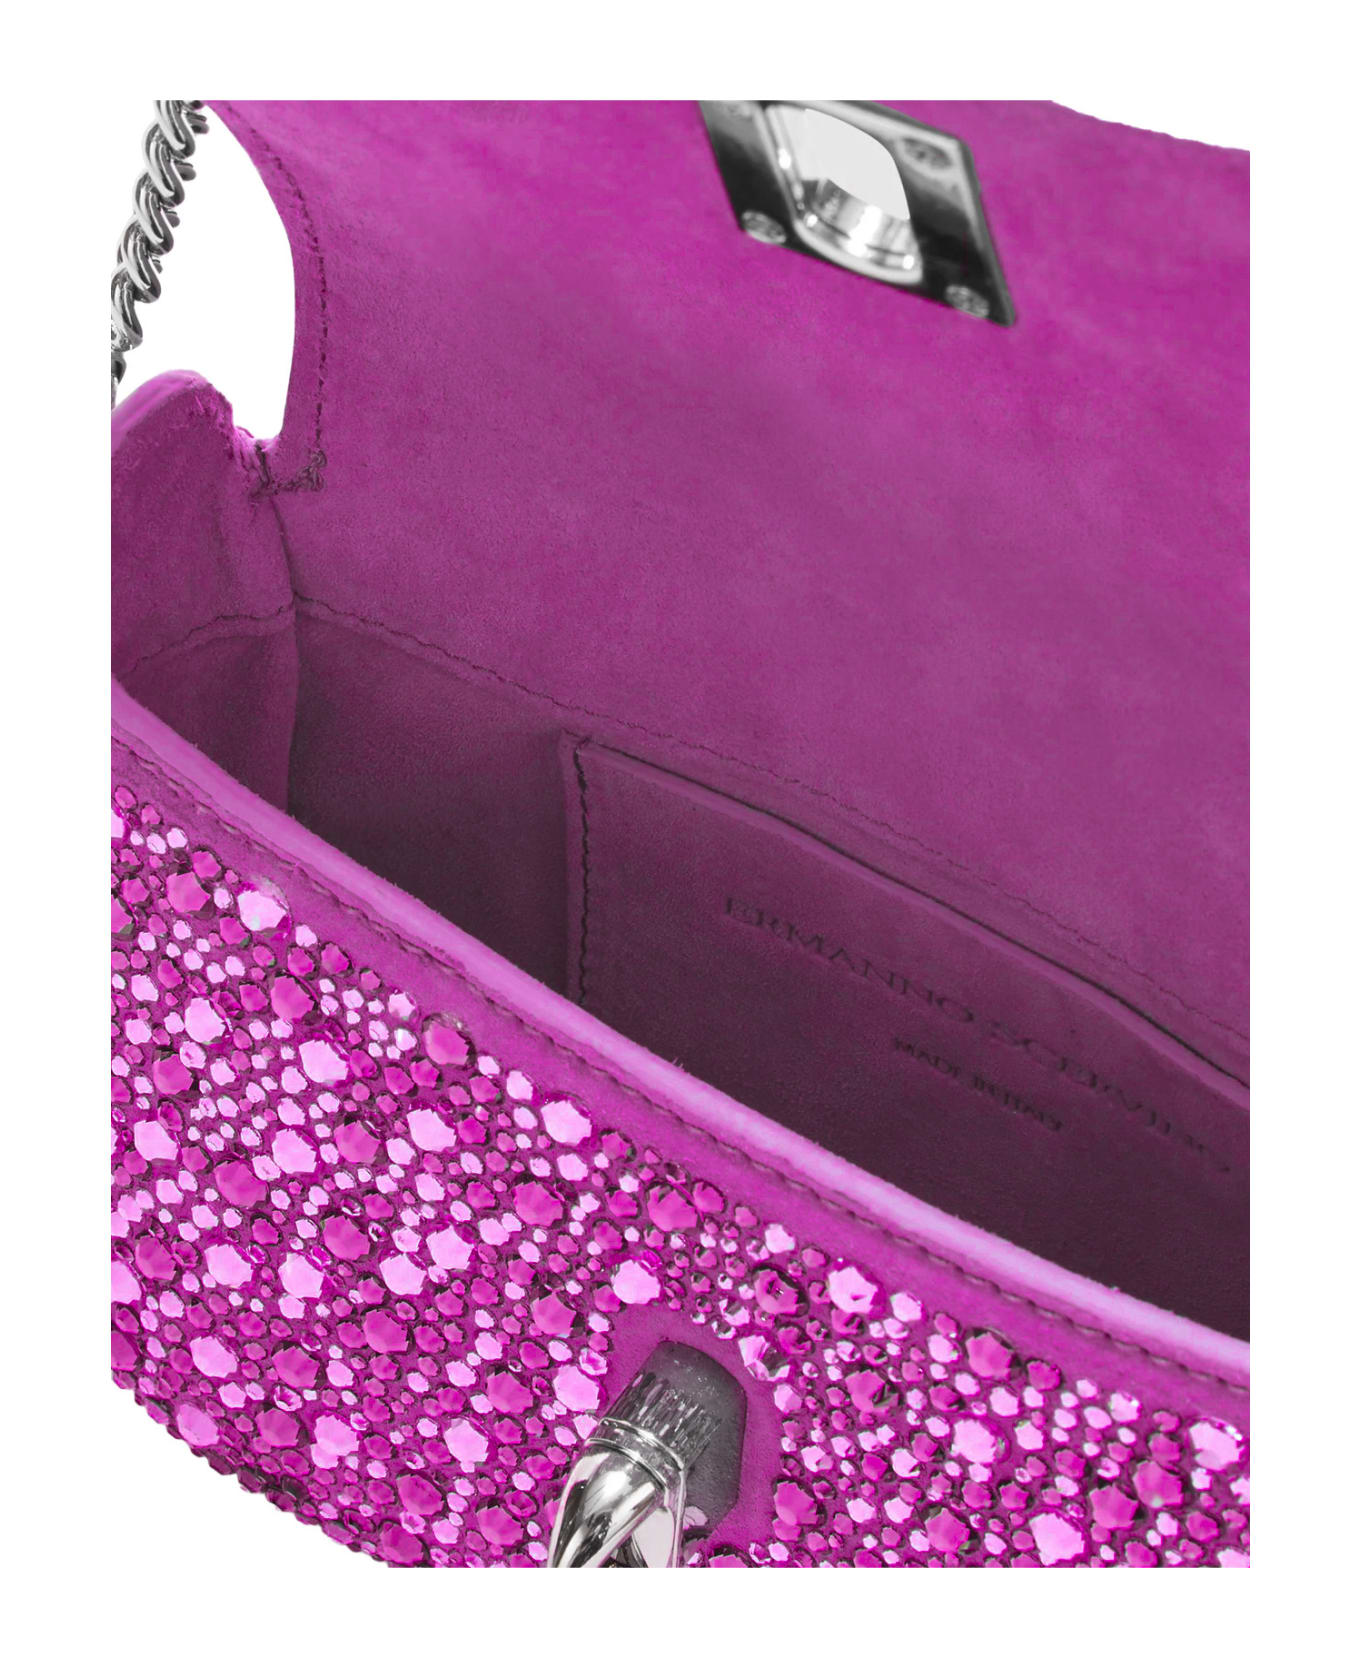 Ermanno Scervino Fuchsia Audrey Bag With Crystals - Pink ショルダーバッグ